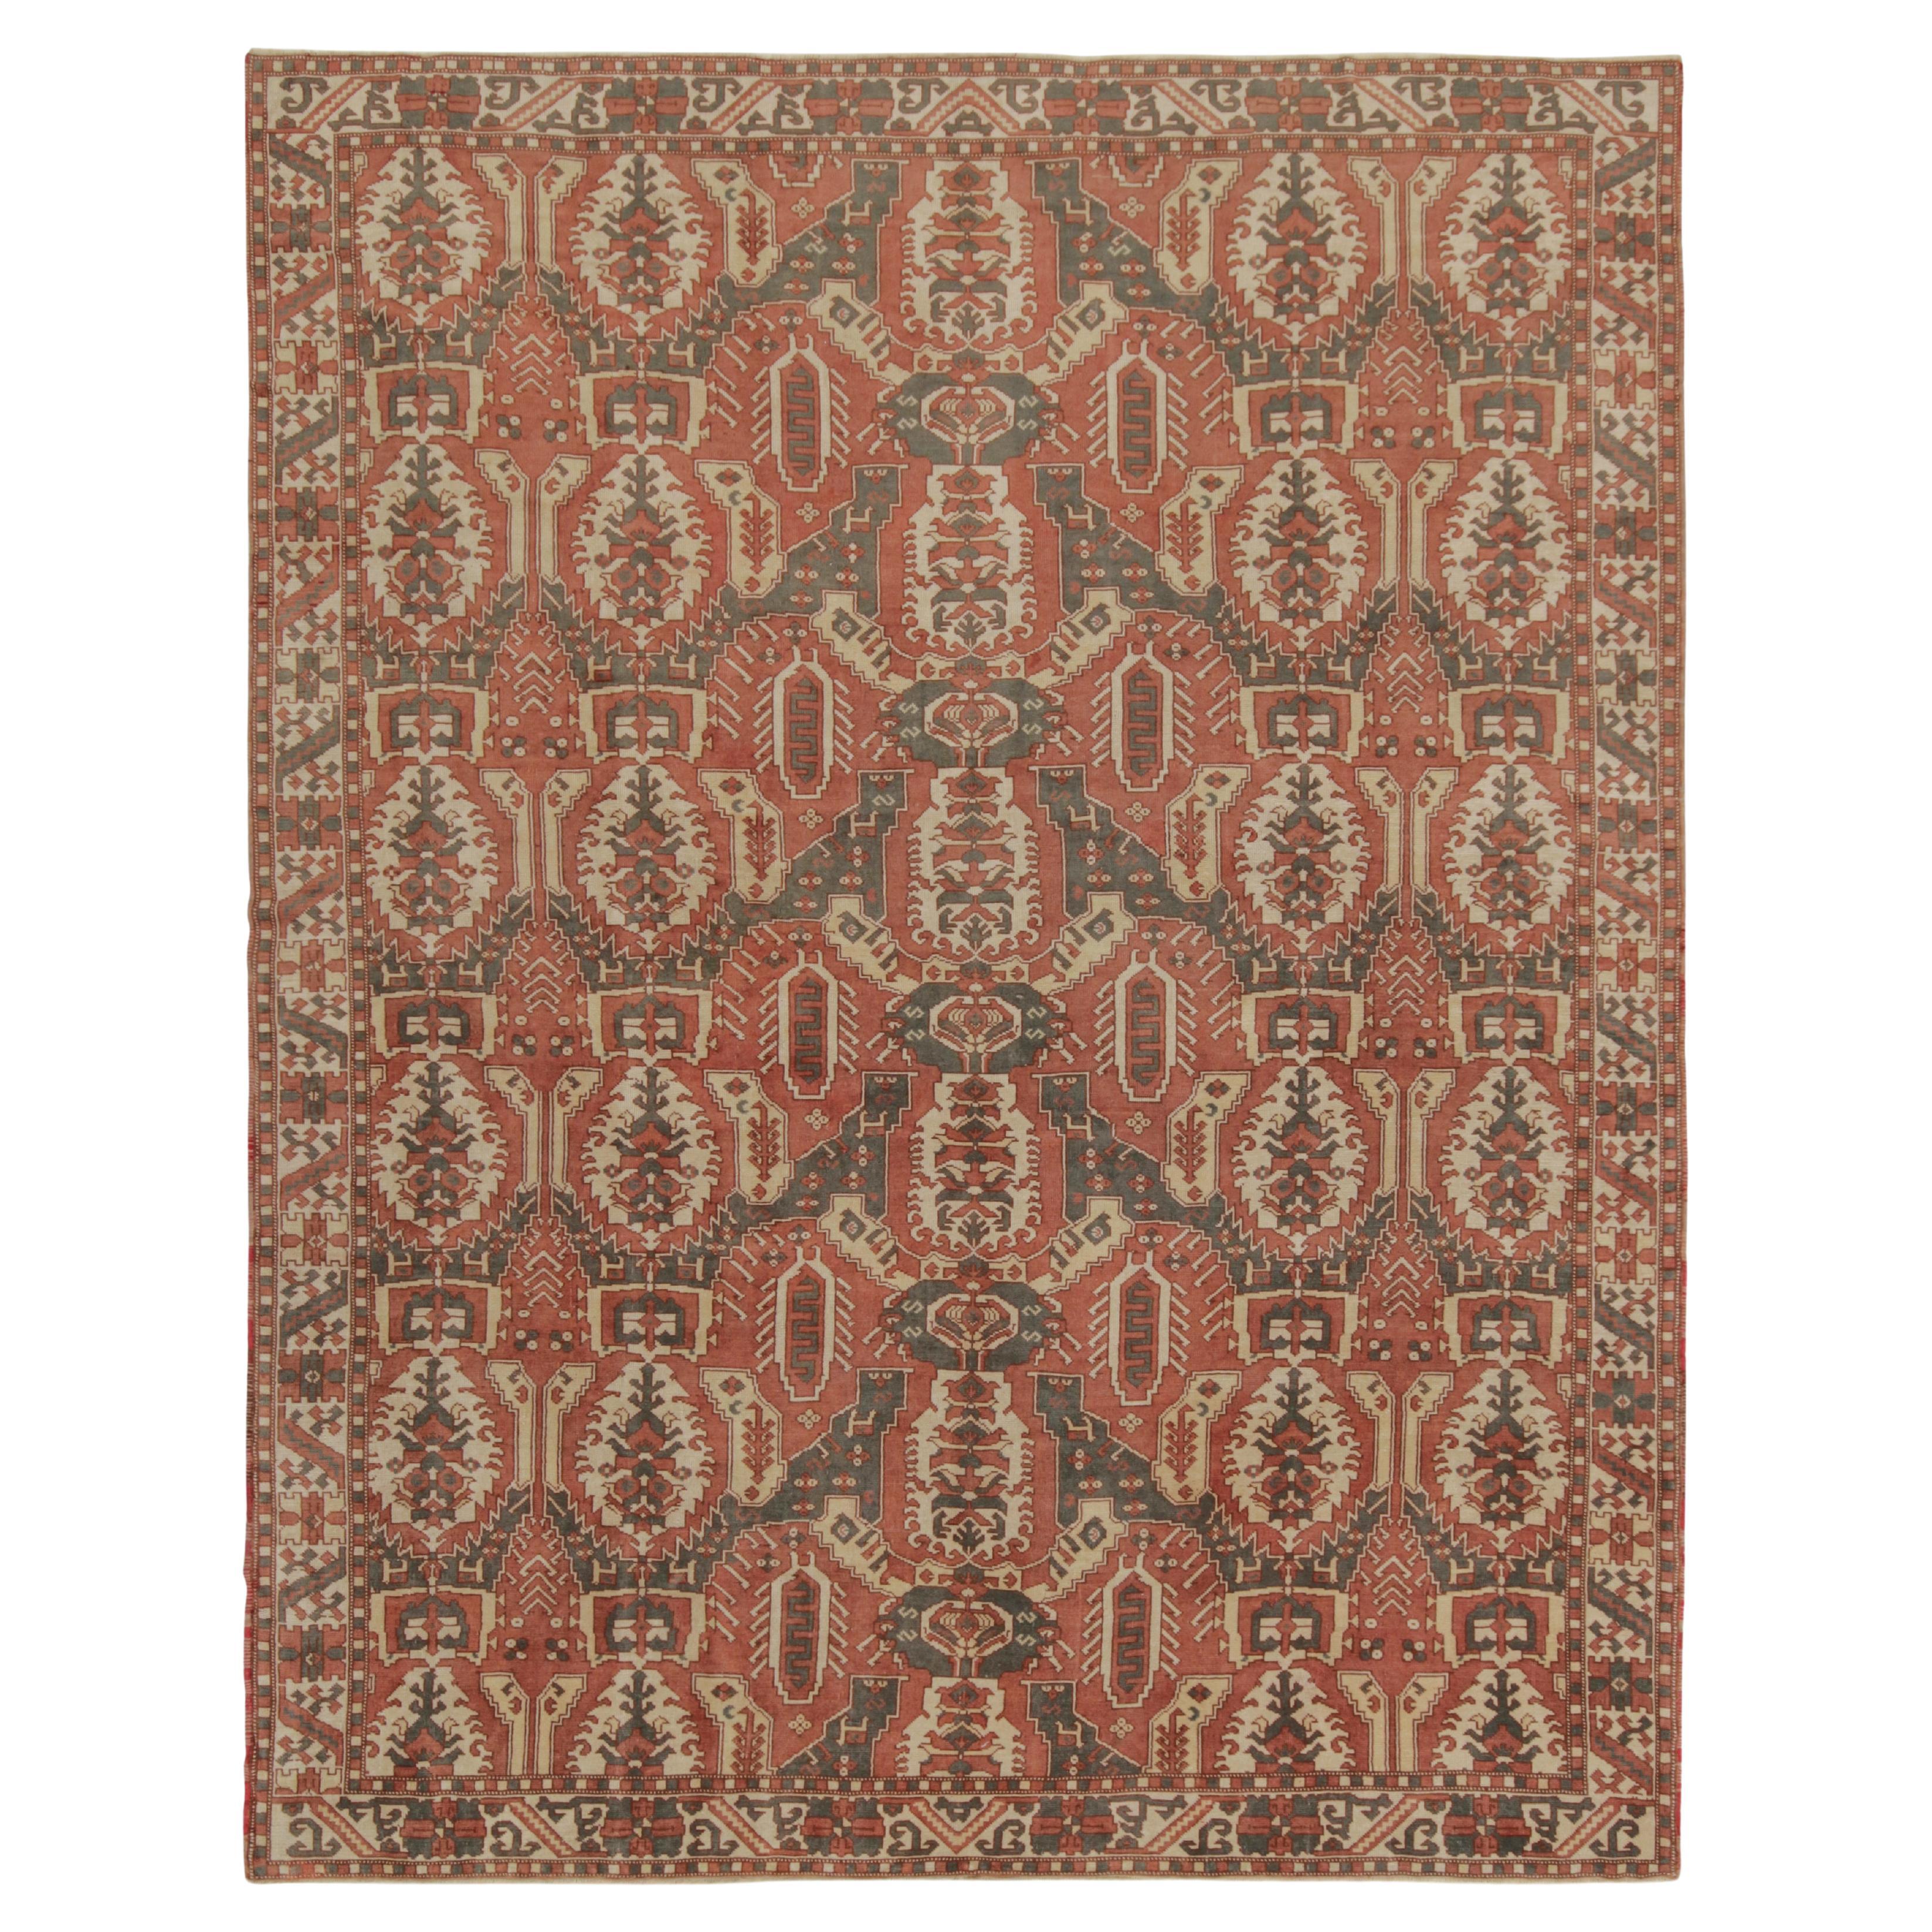 Rug & Kilim’s Classic Tribal style Rug in Brick Red with Geometric Patterns For Sale